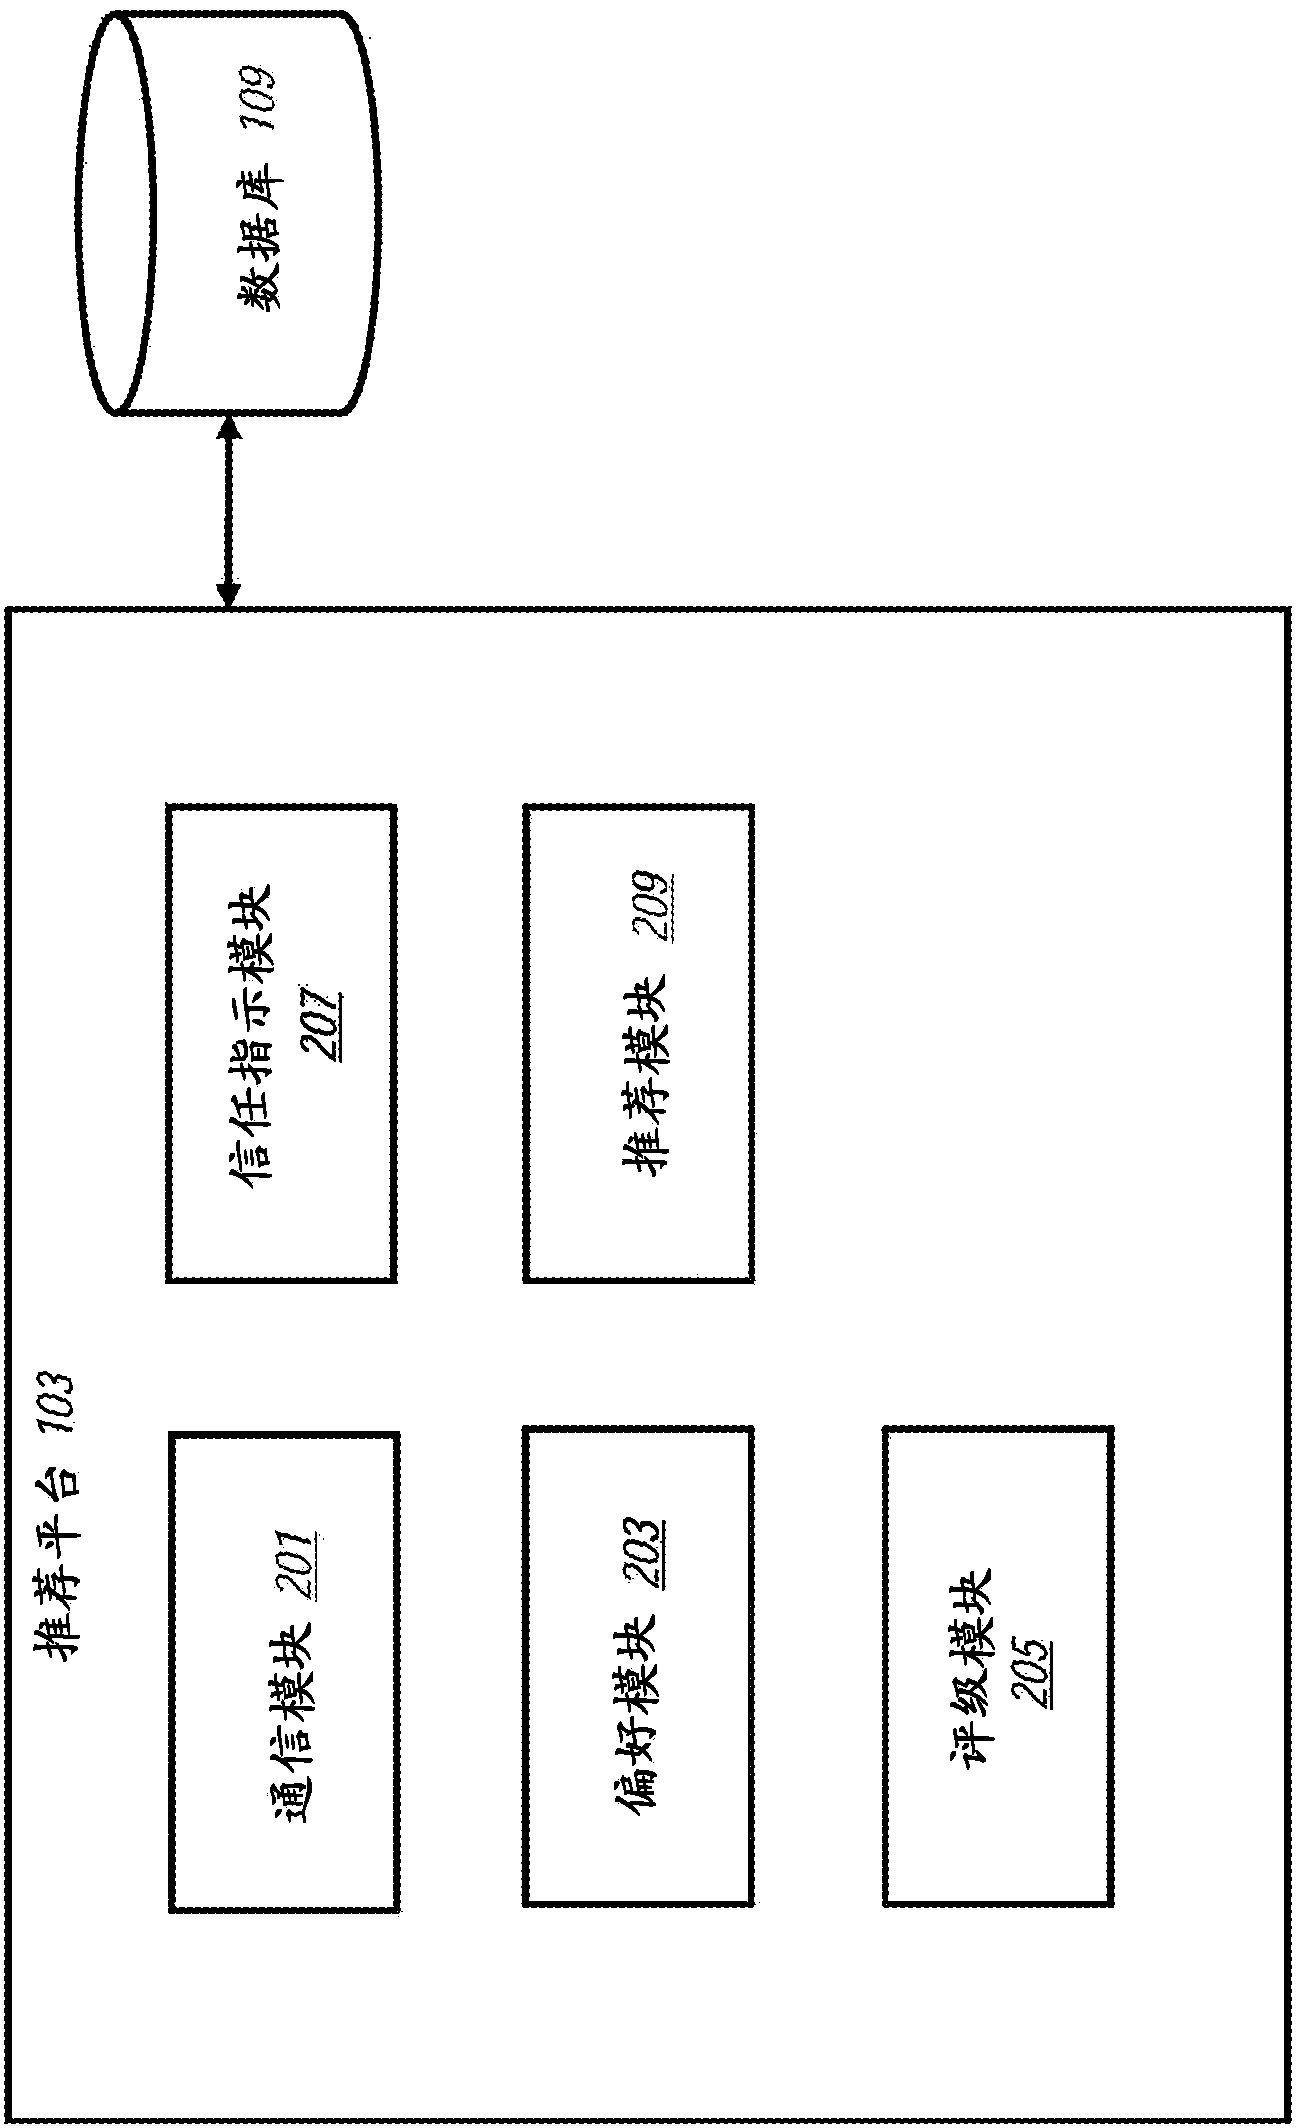 Method and apparatus for collaborative filtering for real-time recommendation